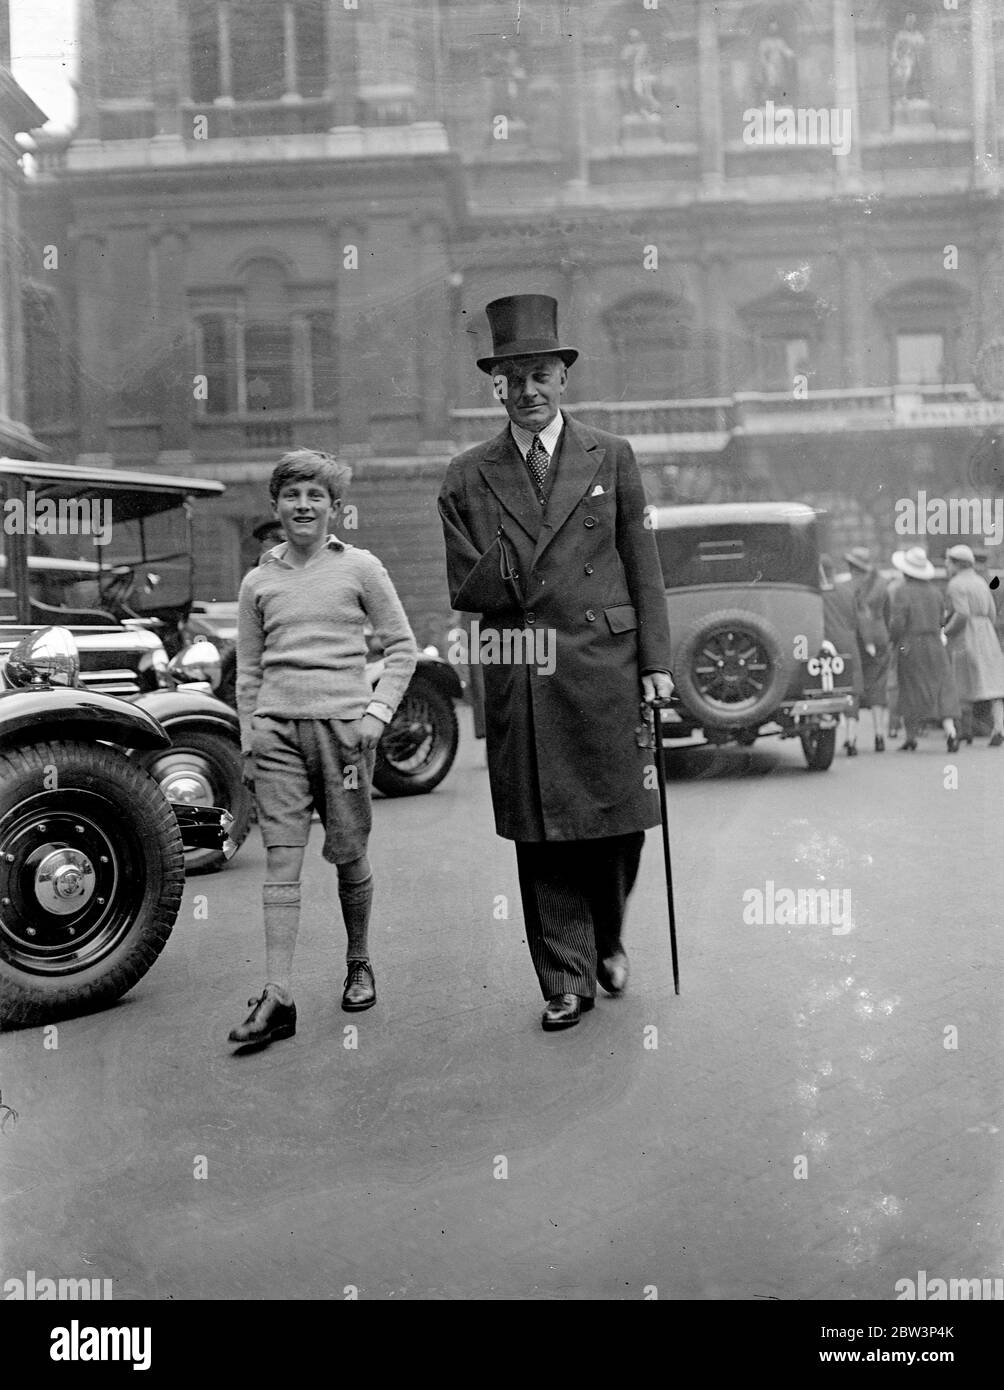 Lord Kennett at Royal Academy private view . There were many distinguished visitors to Burlington House for the private view of the Royal Academy Summer exhibition . Photo shows , Lord Kennett and his son Wayland at Burlington House . 1 May 1936 Stock Photo